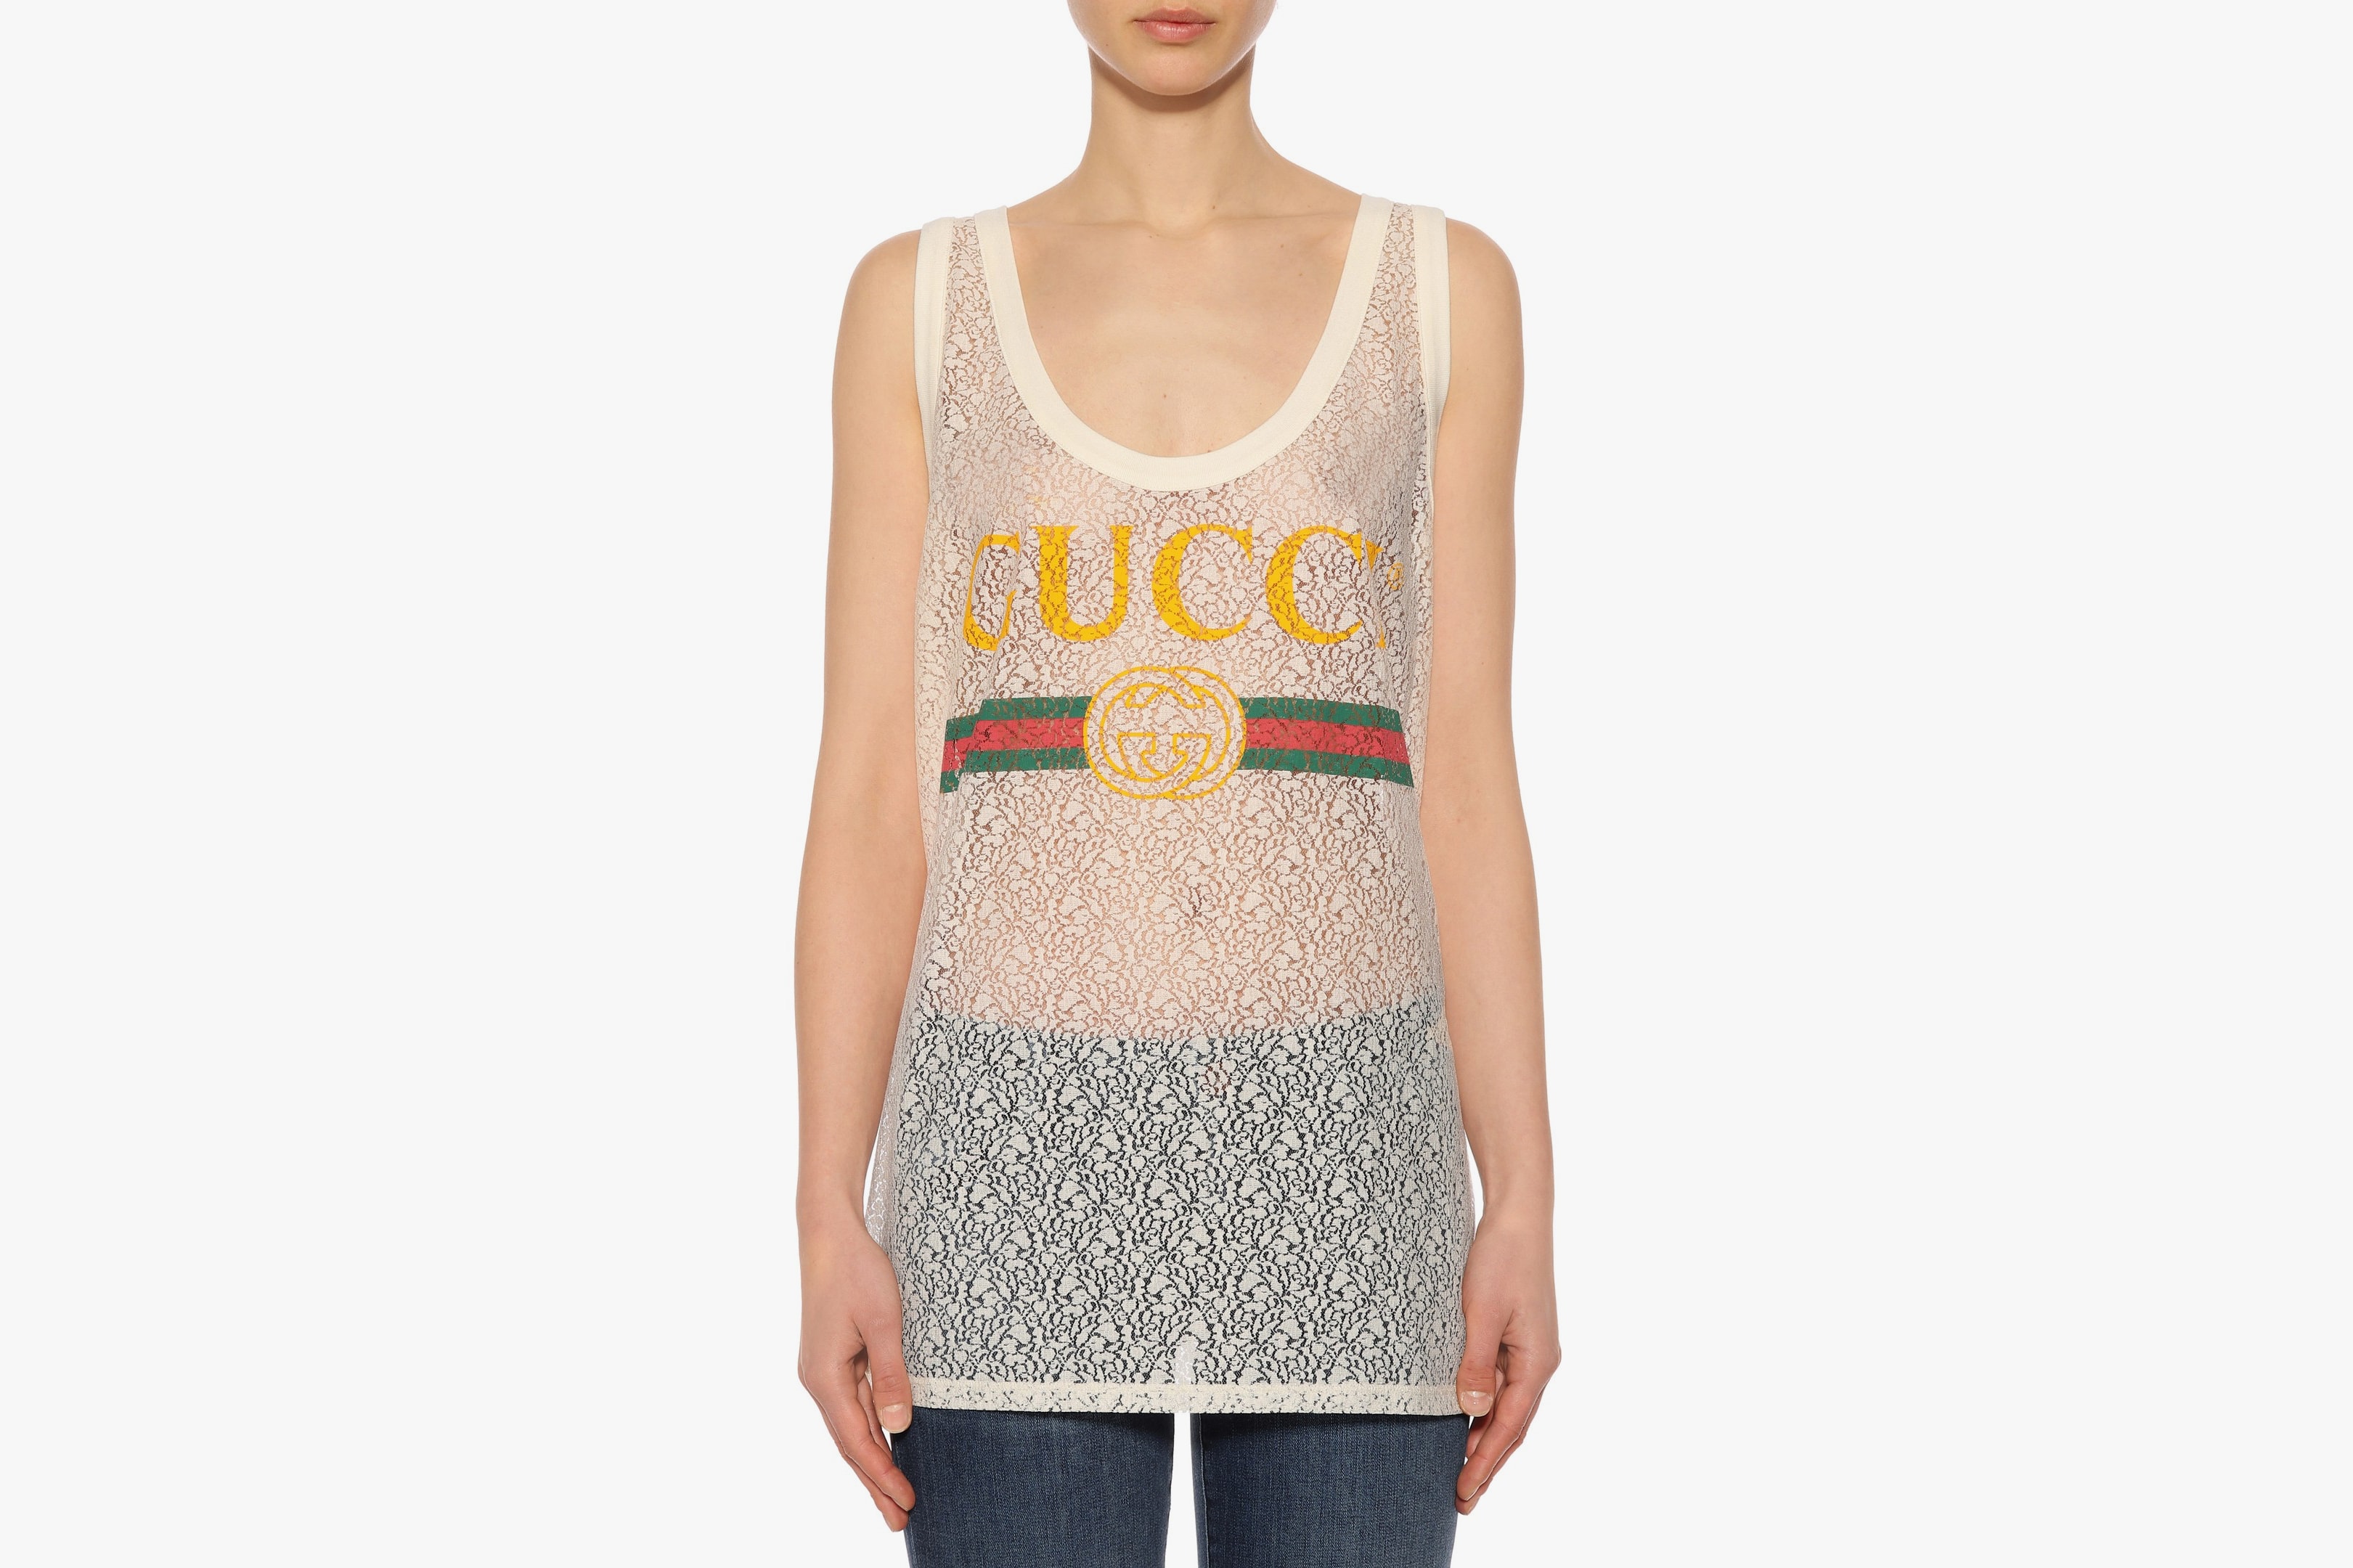 Gucci Vintage Logo Lace Tank Top Iconic Summer Piece Luxury